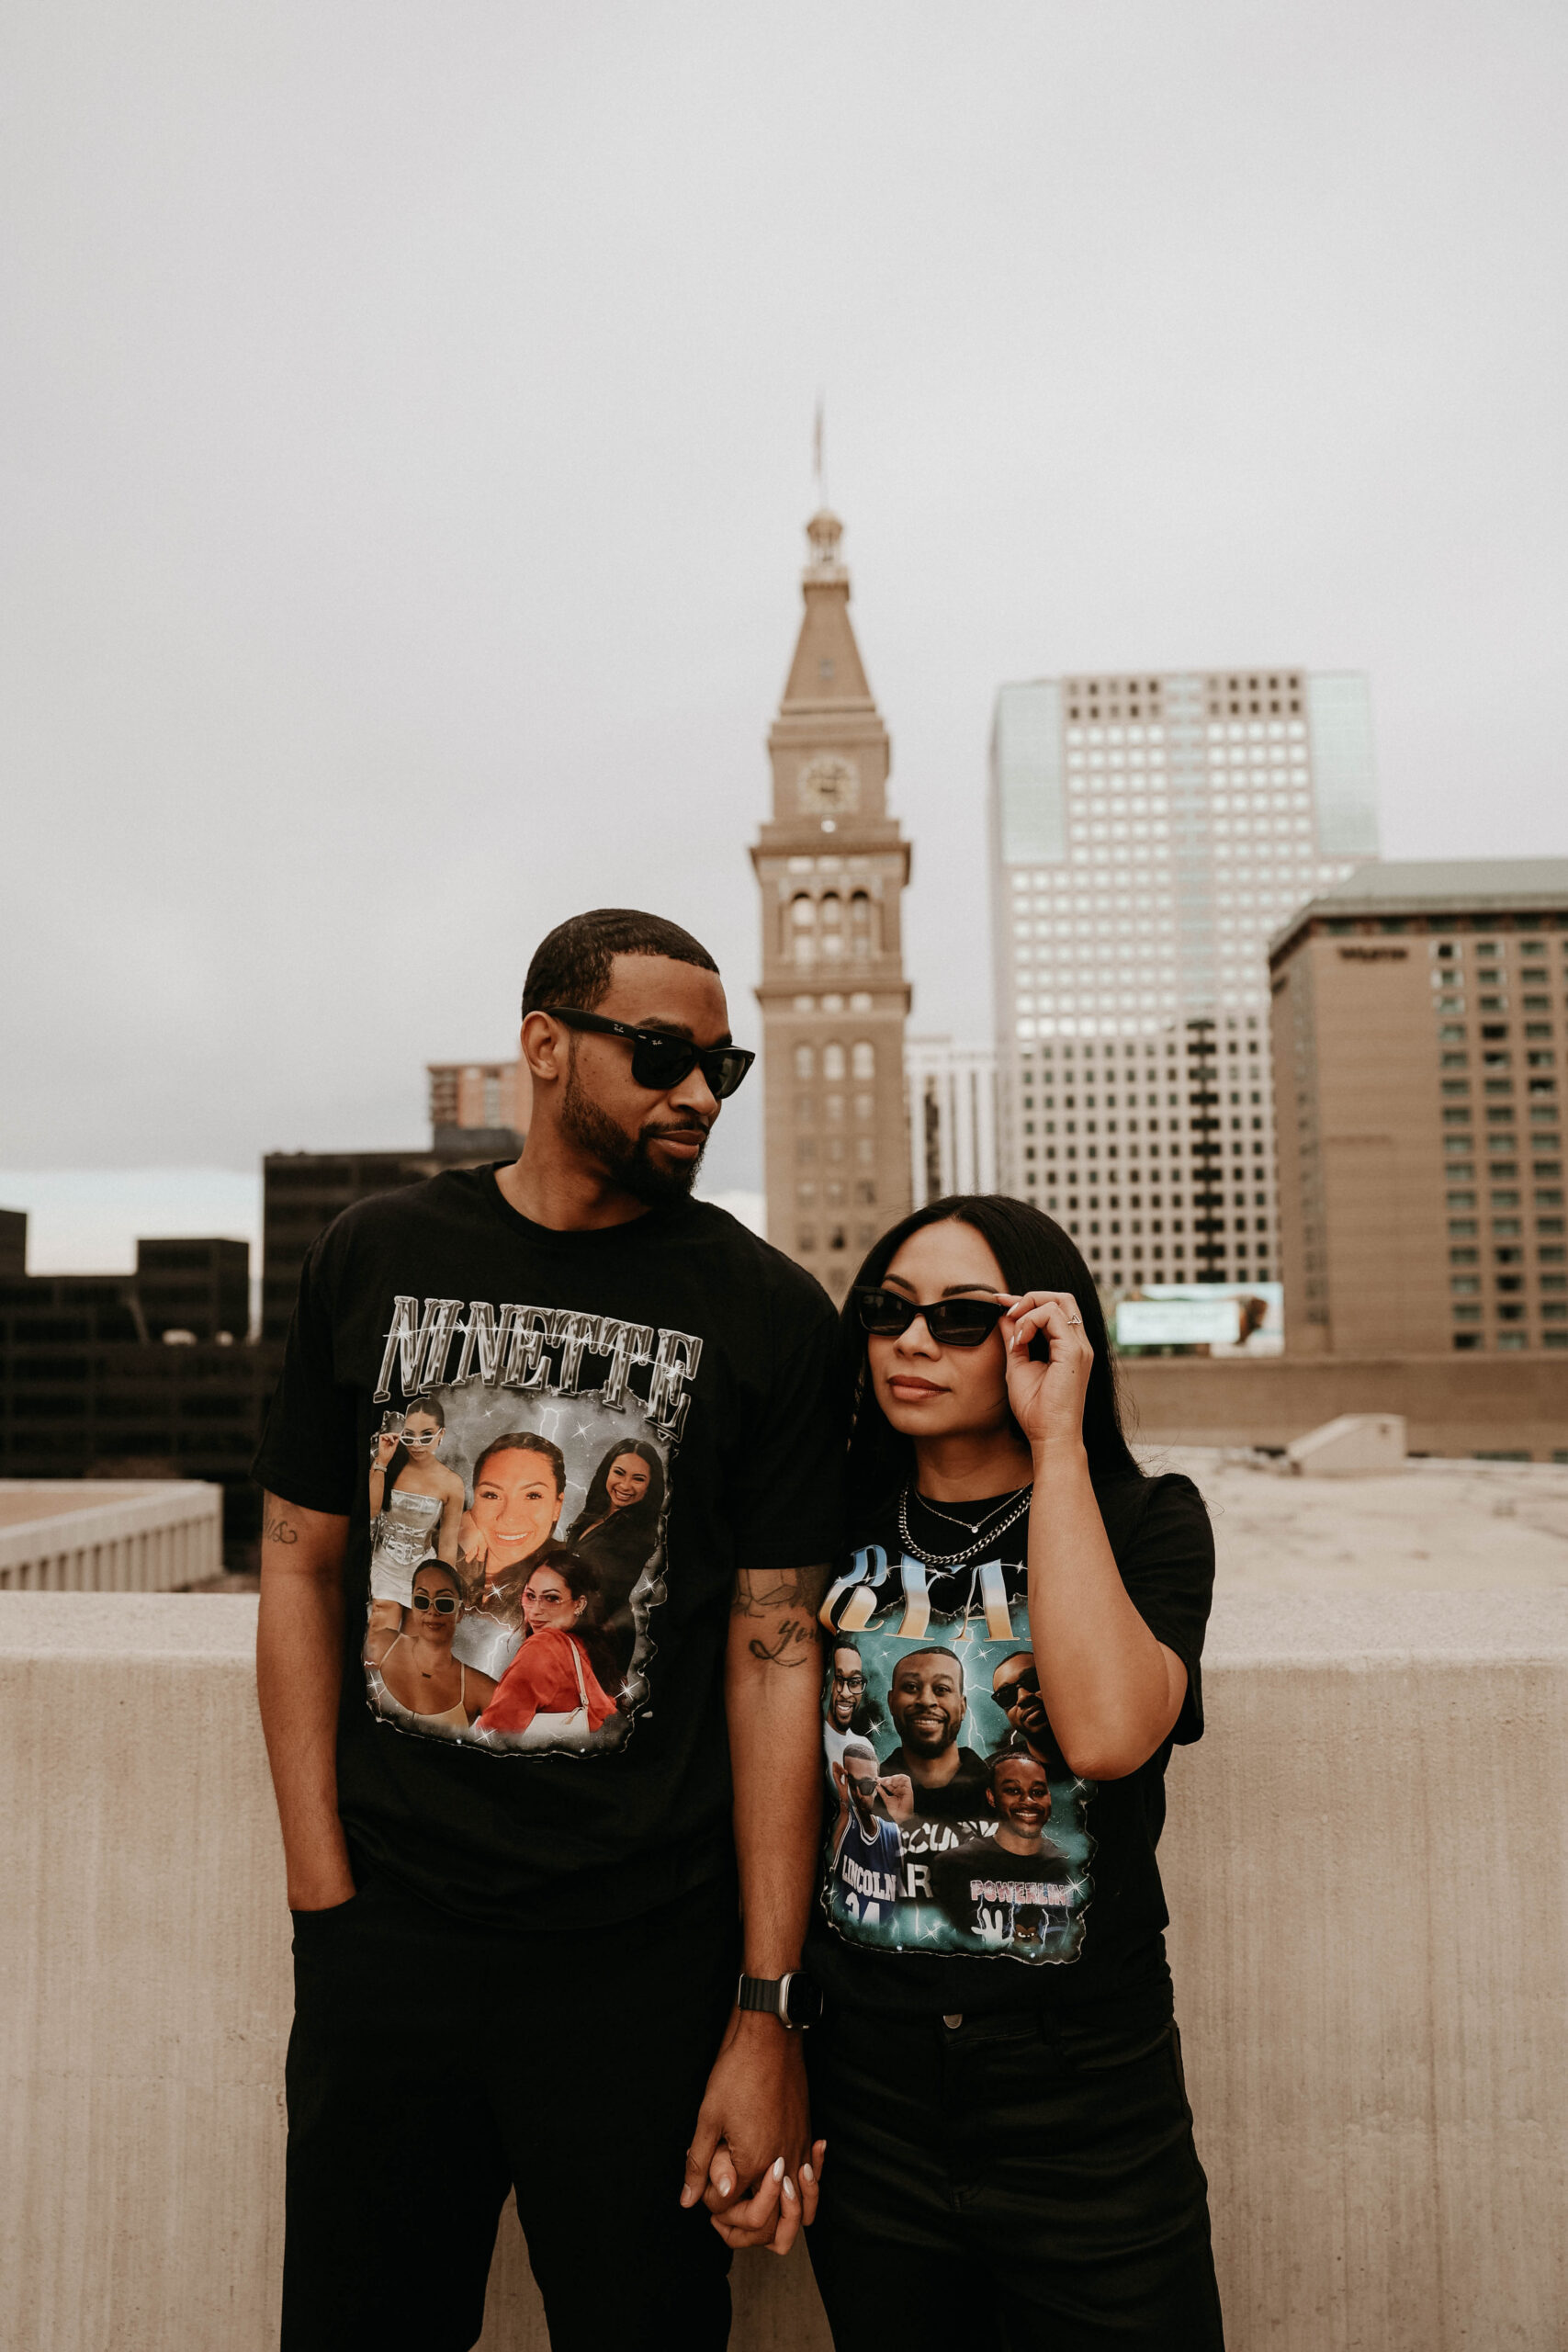 newly engaged couple on a rooftop with glasses on expressing their unique engagement shoot ideas